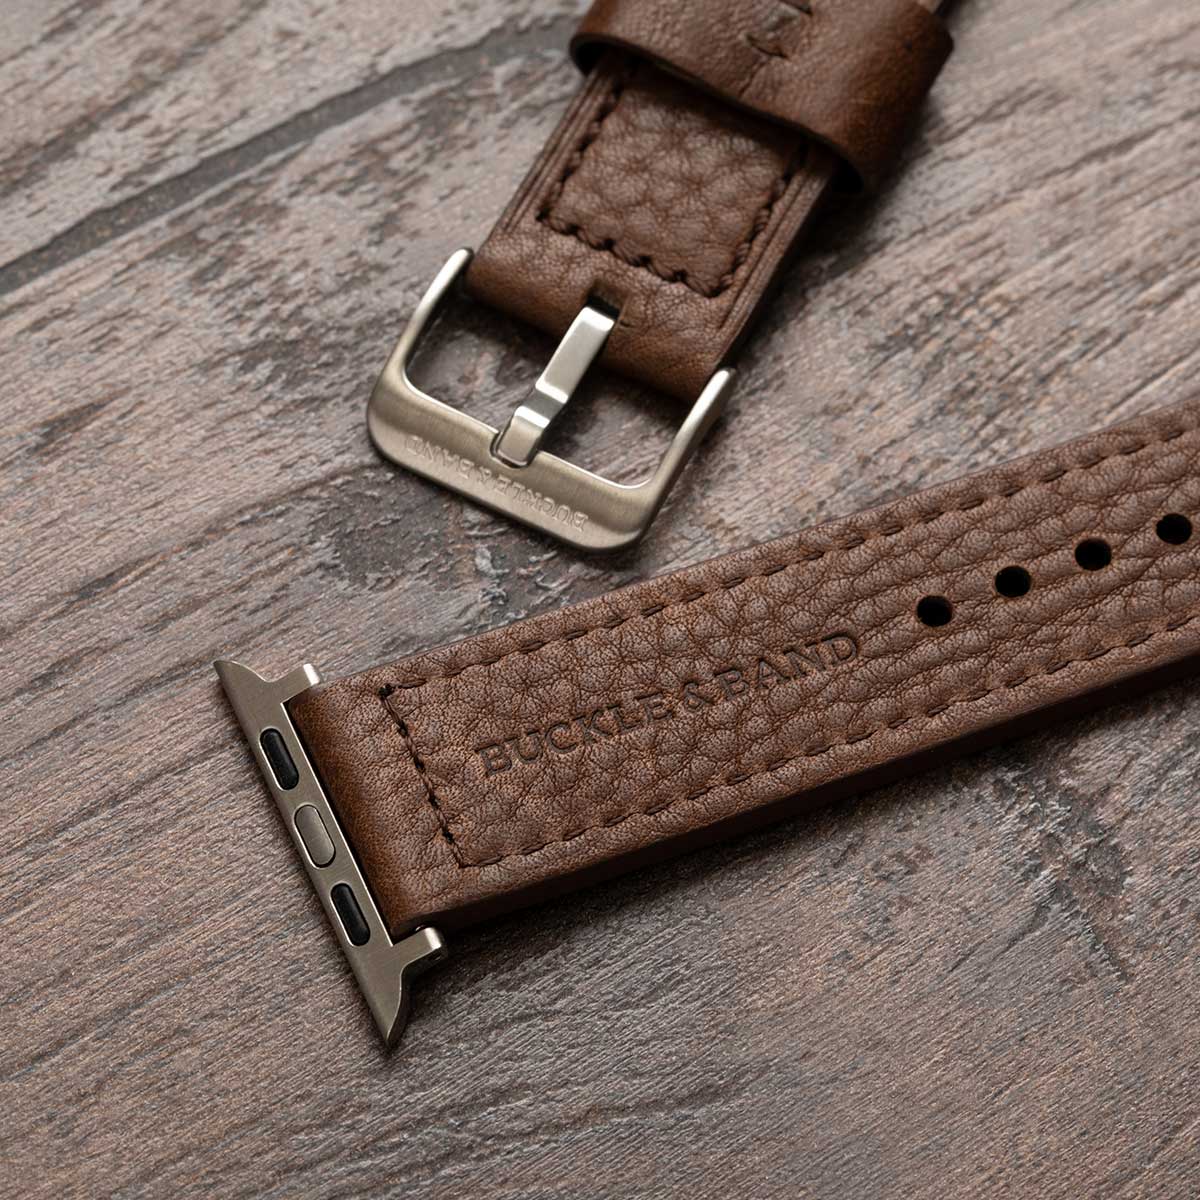 Pre-Loved Vegan Leather Apple Watch Strap - Buckle and Band - PREL-VEG-38-BRN-SI